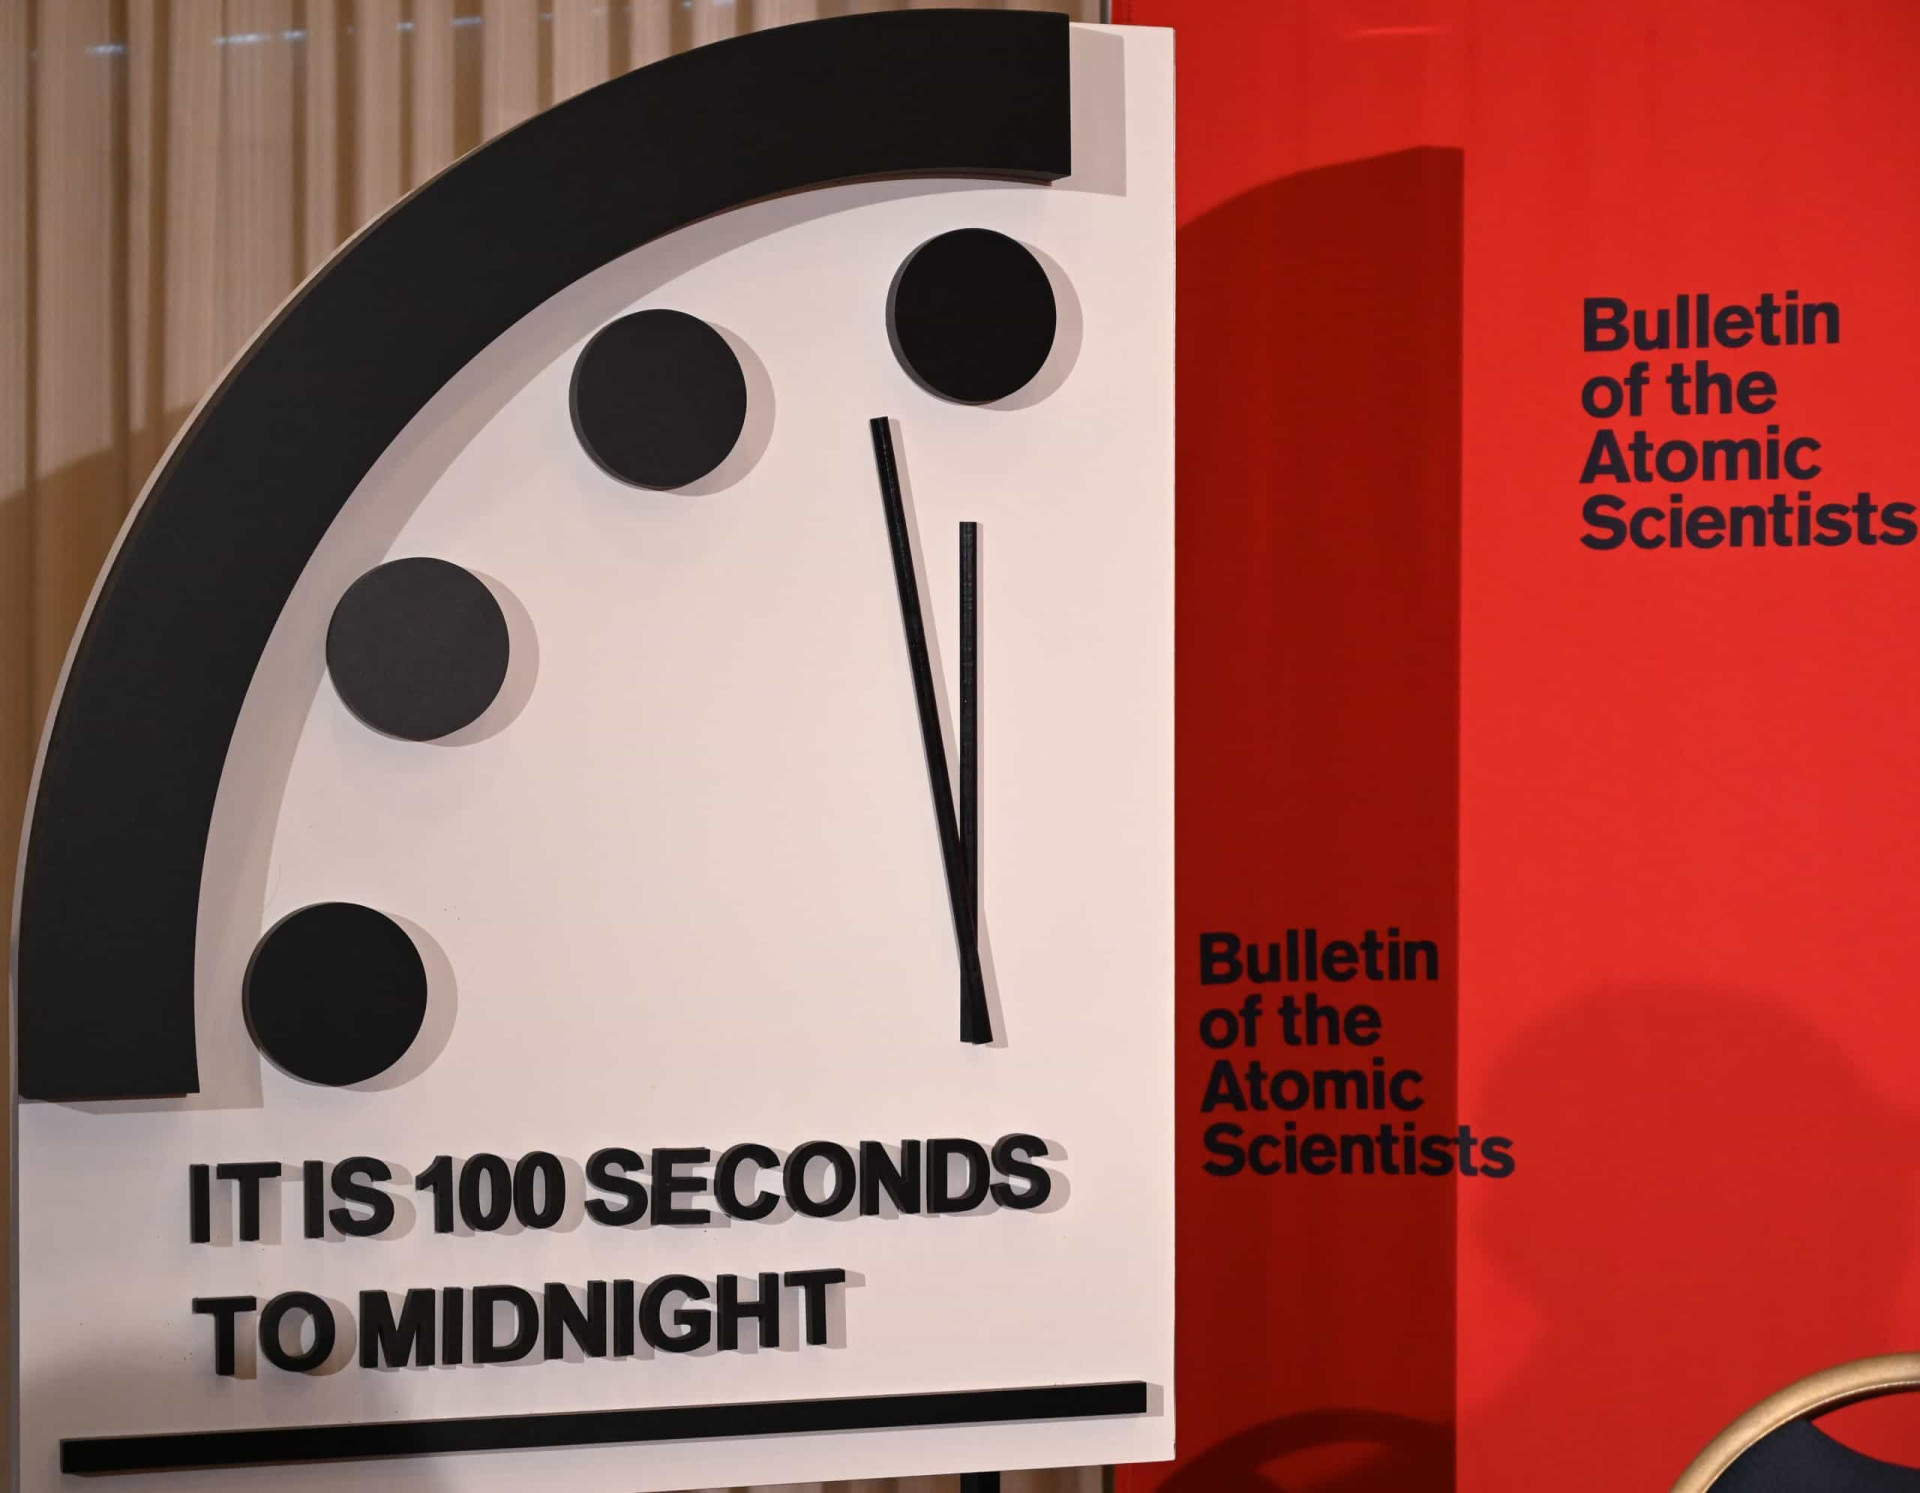 <p>In 2020, the unit of time was announced in seconds (100) to emphasize "the most dangerous situation that humanity has ever faced," according to the Bulletin of the Atomic Scientists.</p><p><a href="https://www.msn.com/en-au/community/channel/vid-7xx8mnucu55yw63we9va2gwr7uihbxwc68fxqp25x6tg4ftibpra?cvid=94631541bc0f4f89bfd59158d696ad7e">Follow us and access great exclusive content every day</a></p>